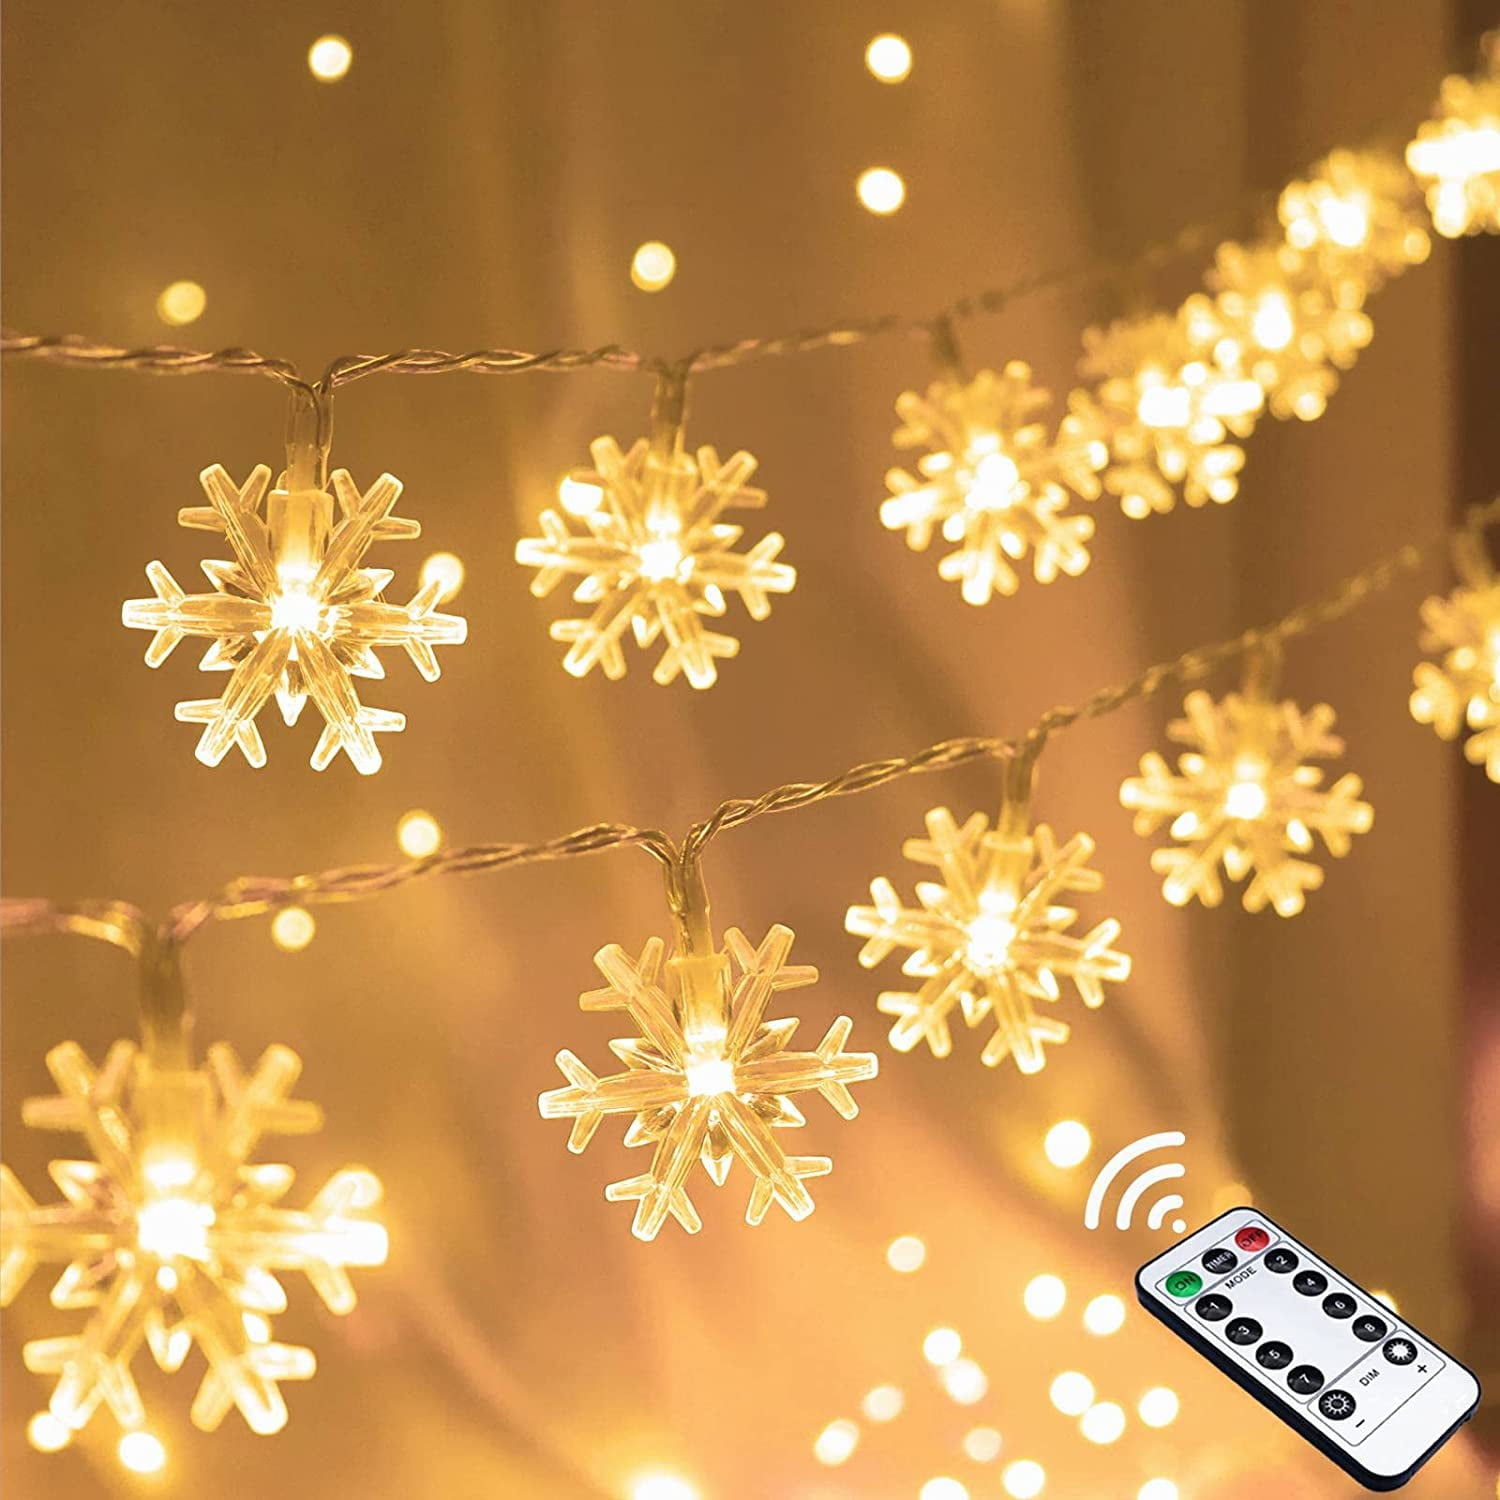 Christmas Snowflake String Lights, FT 40 LED Battery Operated Fairy Lights with Remote, 8 Modes Timer Hanging Decor for Bedroom Patio Party Wall Indoor Outdoor Xmas Tree Decorations Warm White - Walmart.com